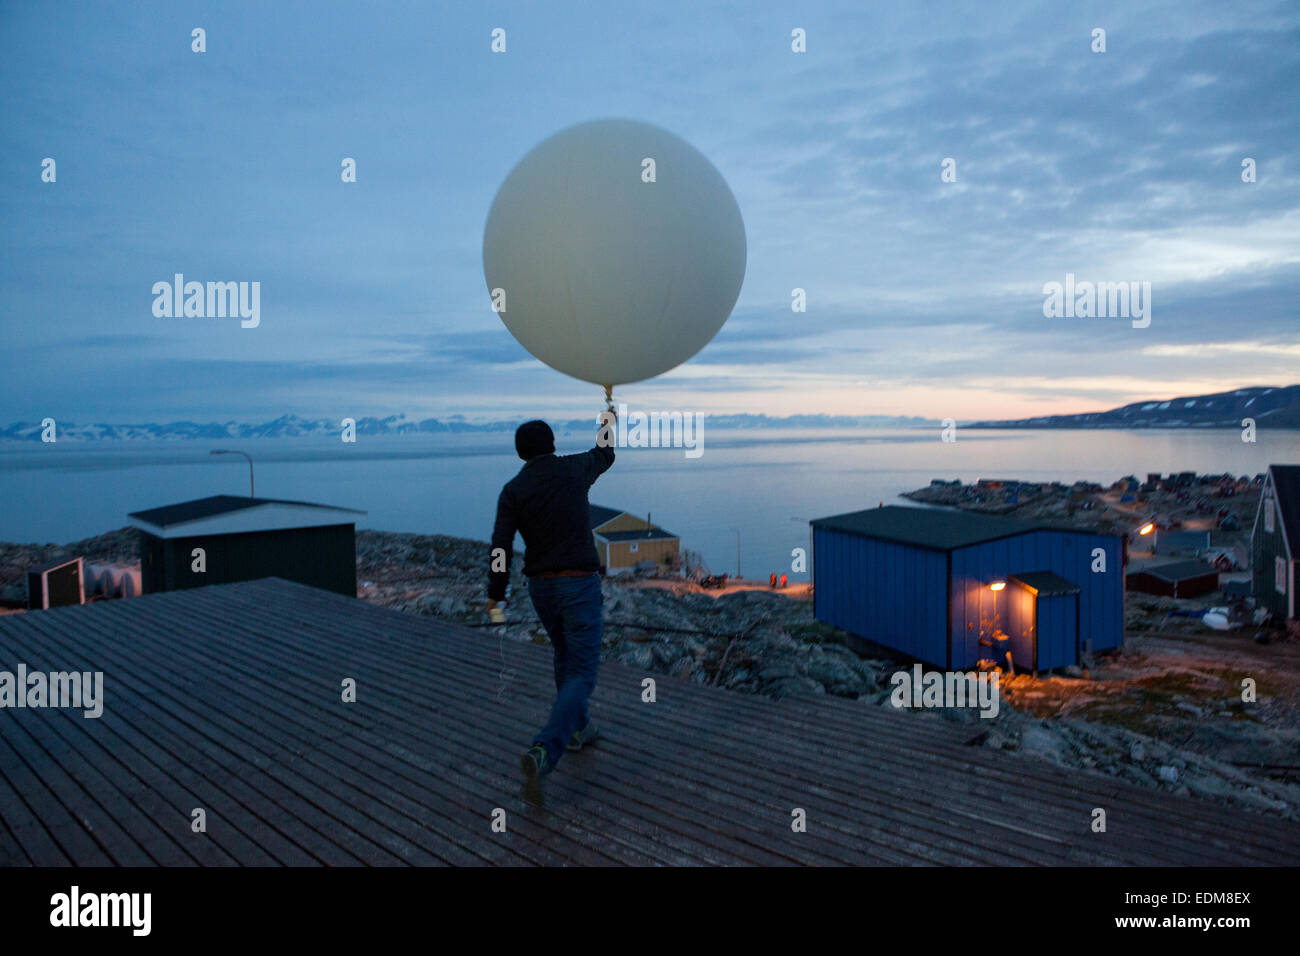 Man releasing a weather balloon over Ittoqqortoormiit, Scoresby Sund, East Greenland. Stock Photo